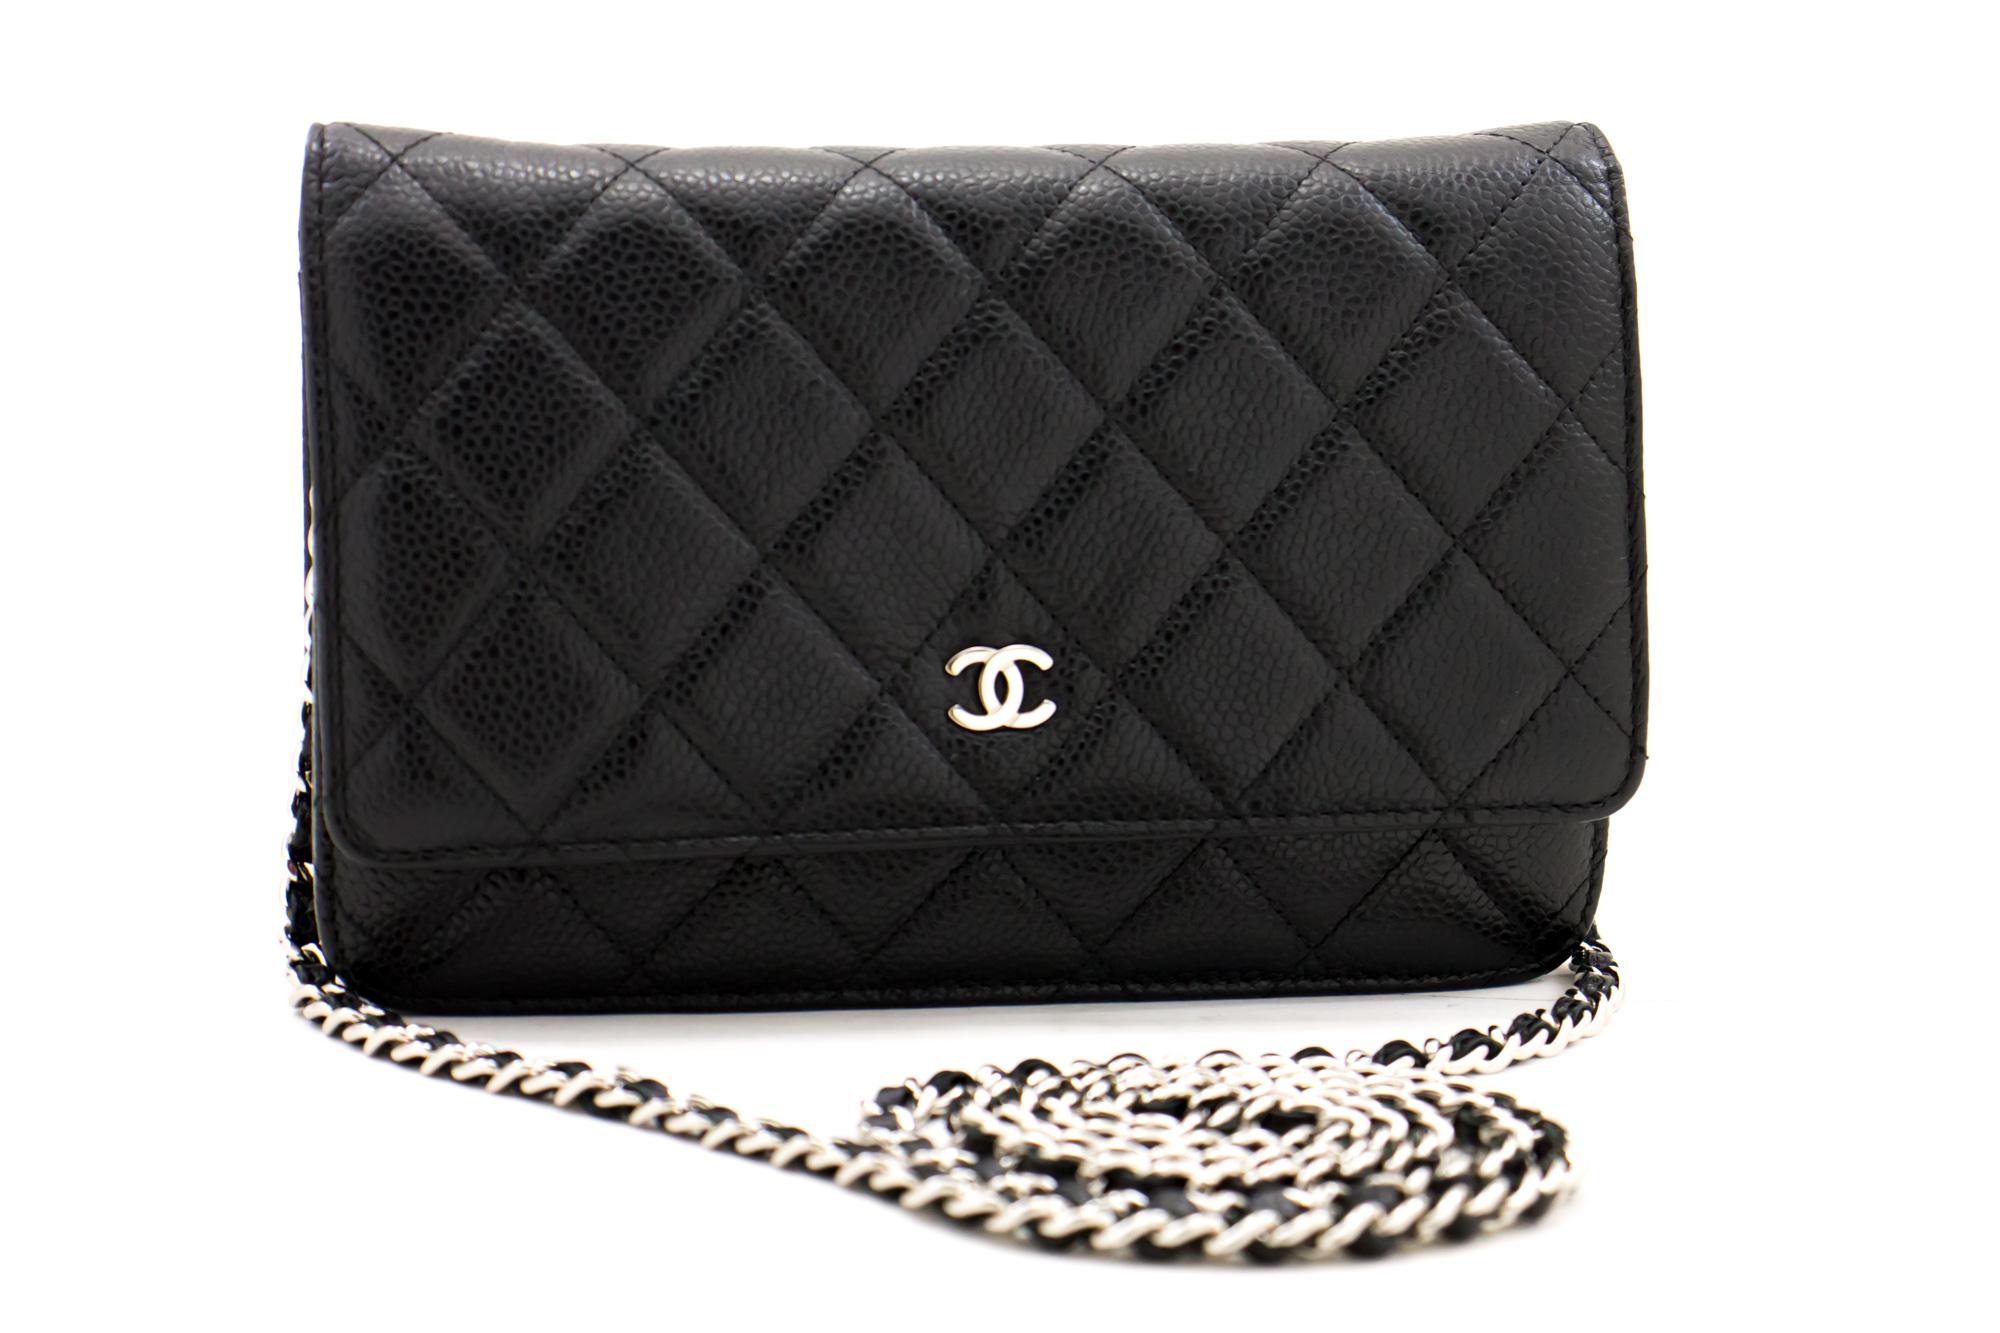 An authentic CHANEL Caviar Wallet On Chain WOC Black Shoulder Bag Crossbody. The color is Black. The outside material is Leather. The pattern is Solid. This item is Contemporary. The year of manufacture would be 2013.
Conditions & Ratings
Outside